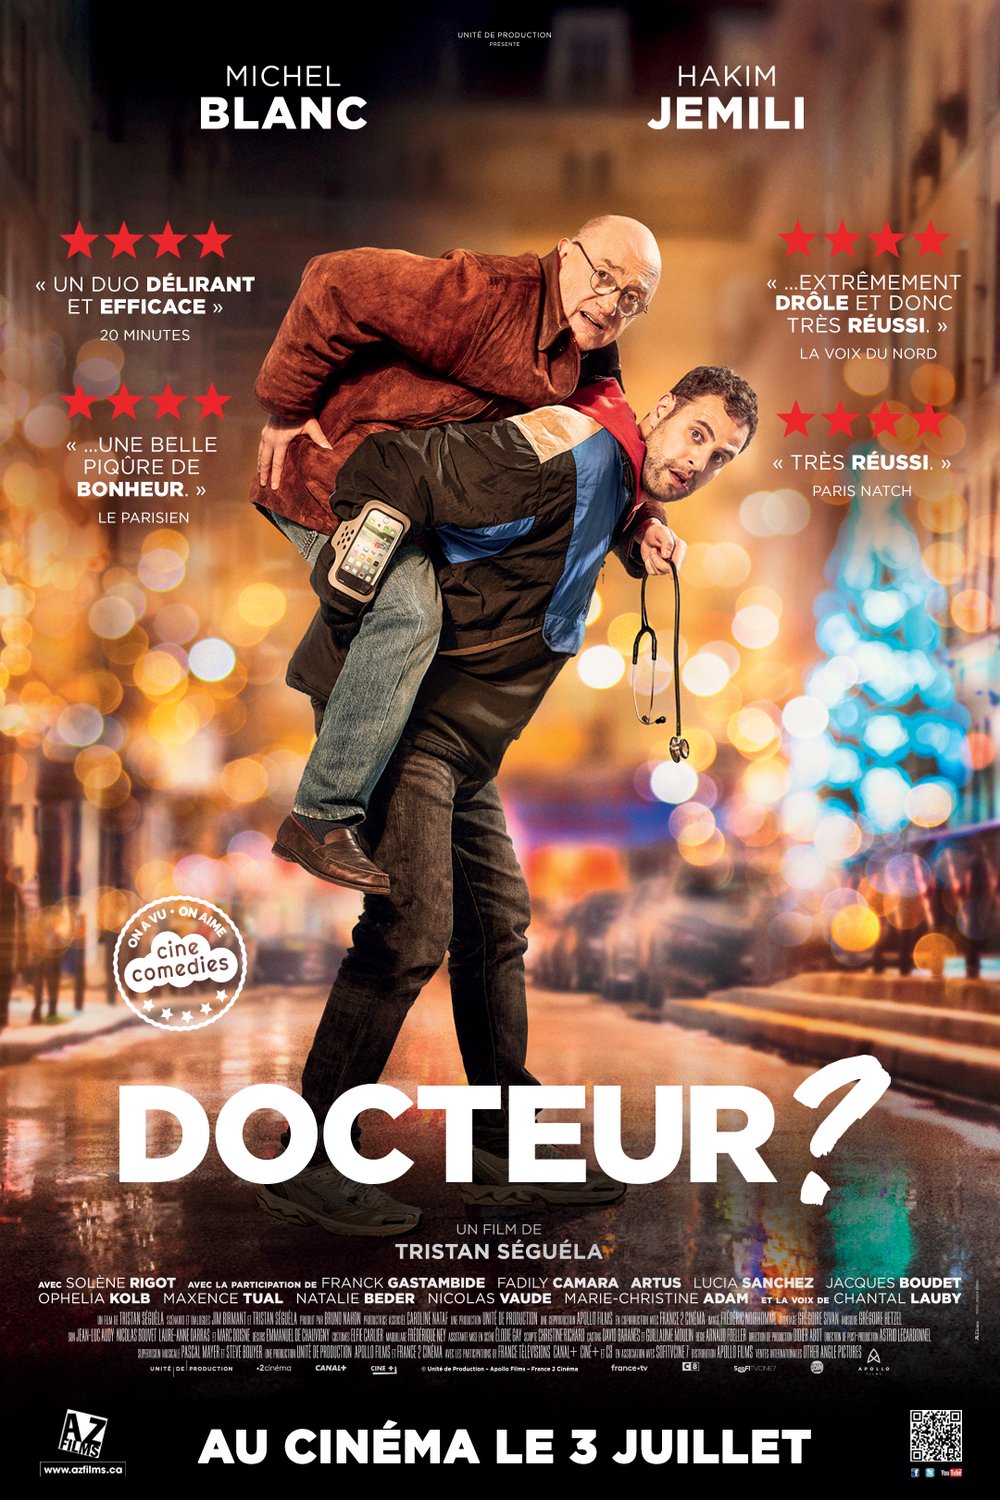 Poster of the movie A Good Doctor